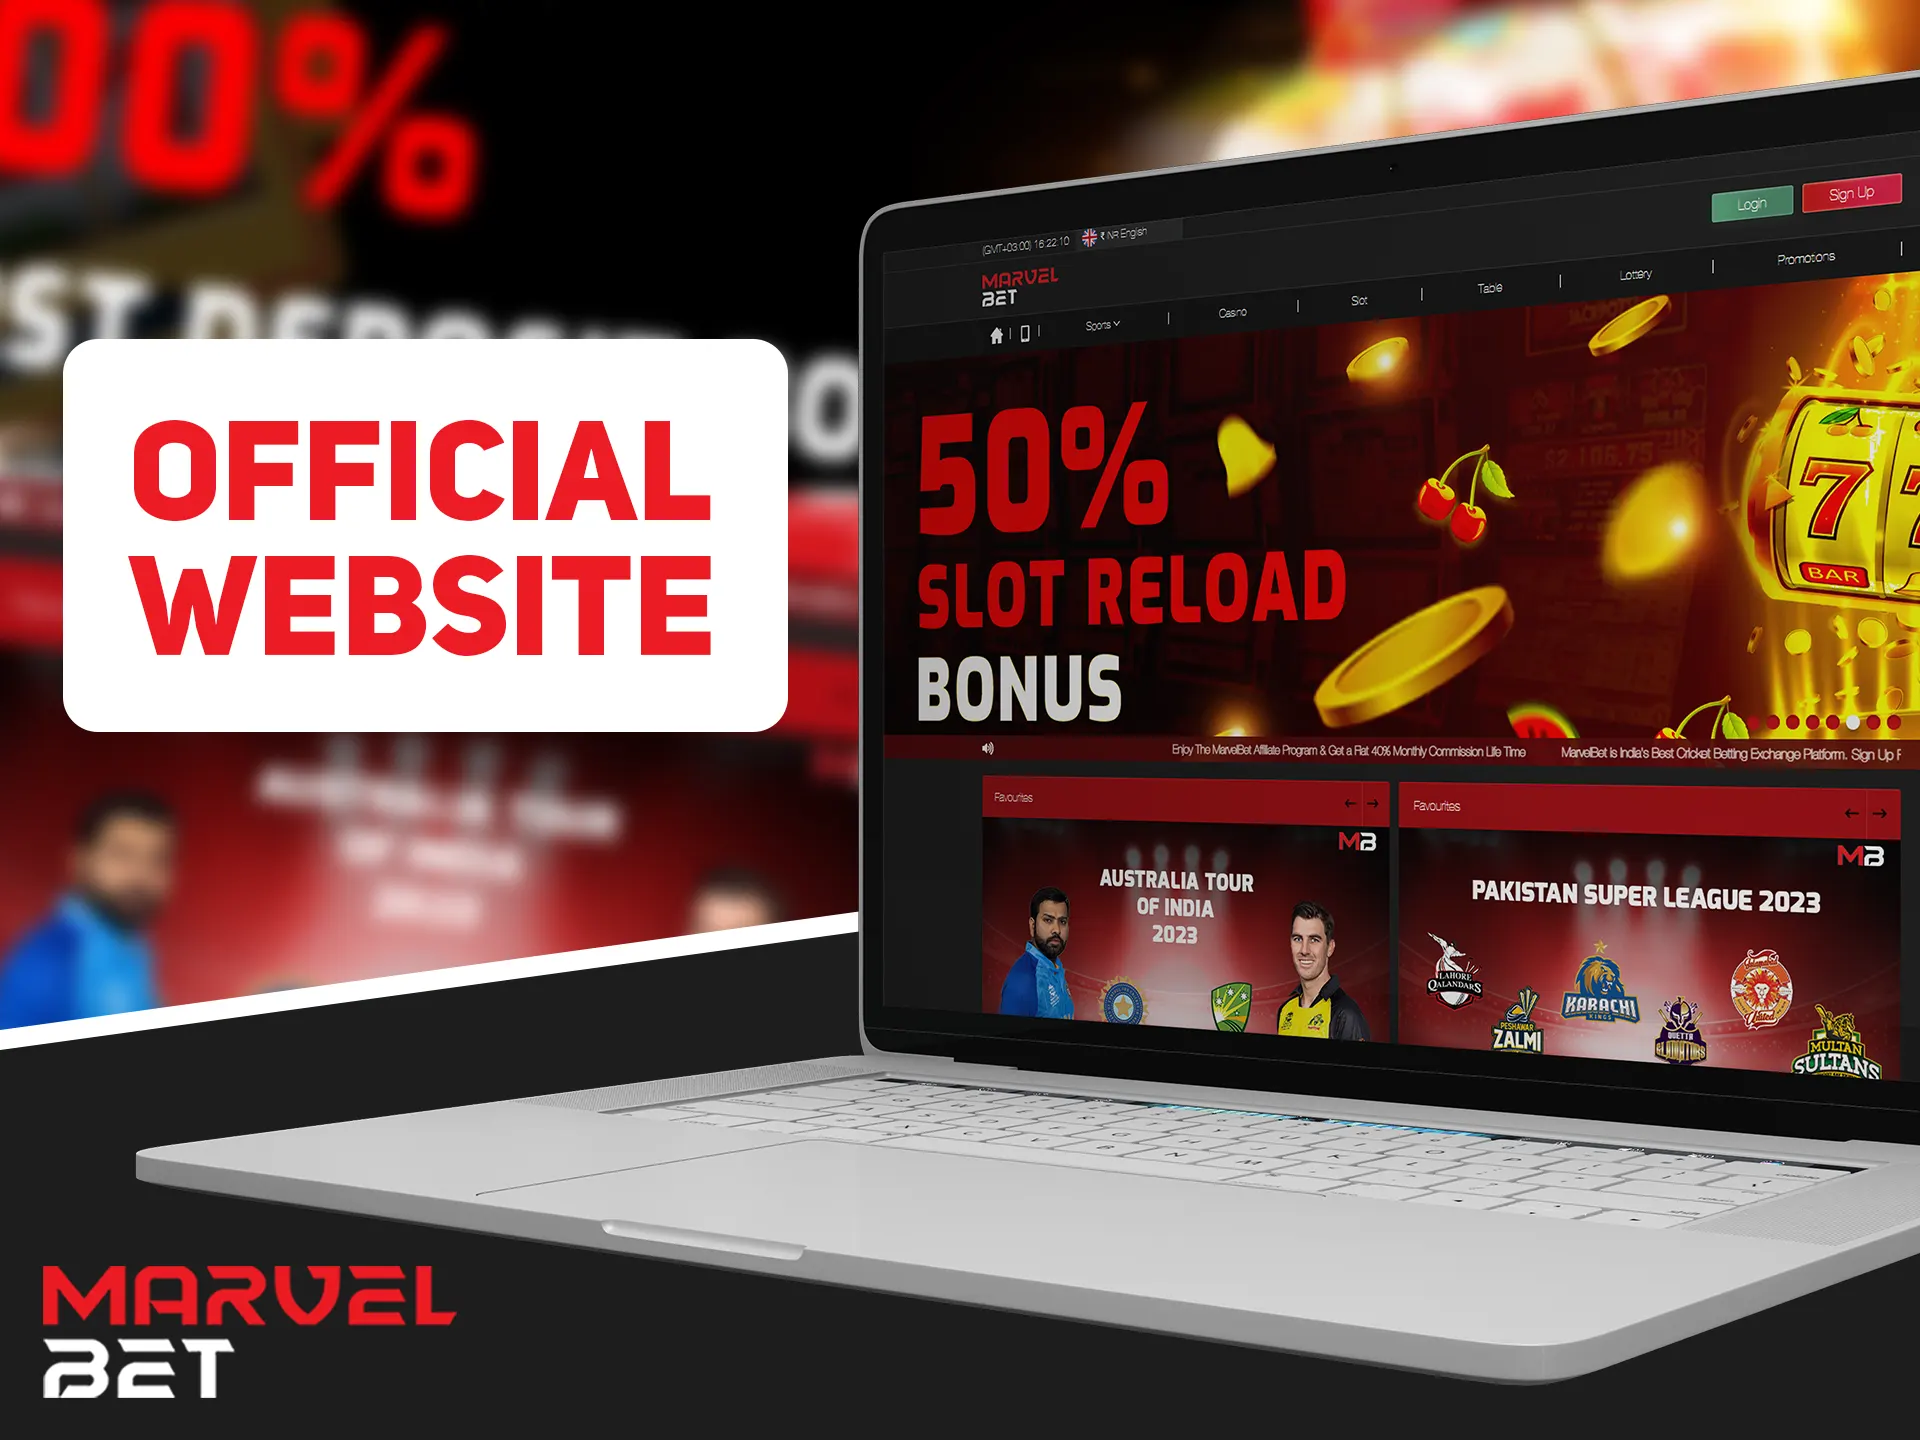 Enter on the Marvelbet main page and start using all of the features.